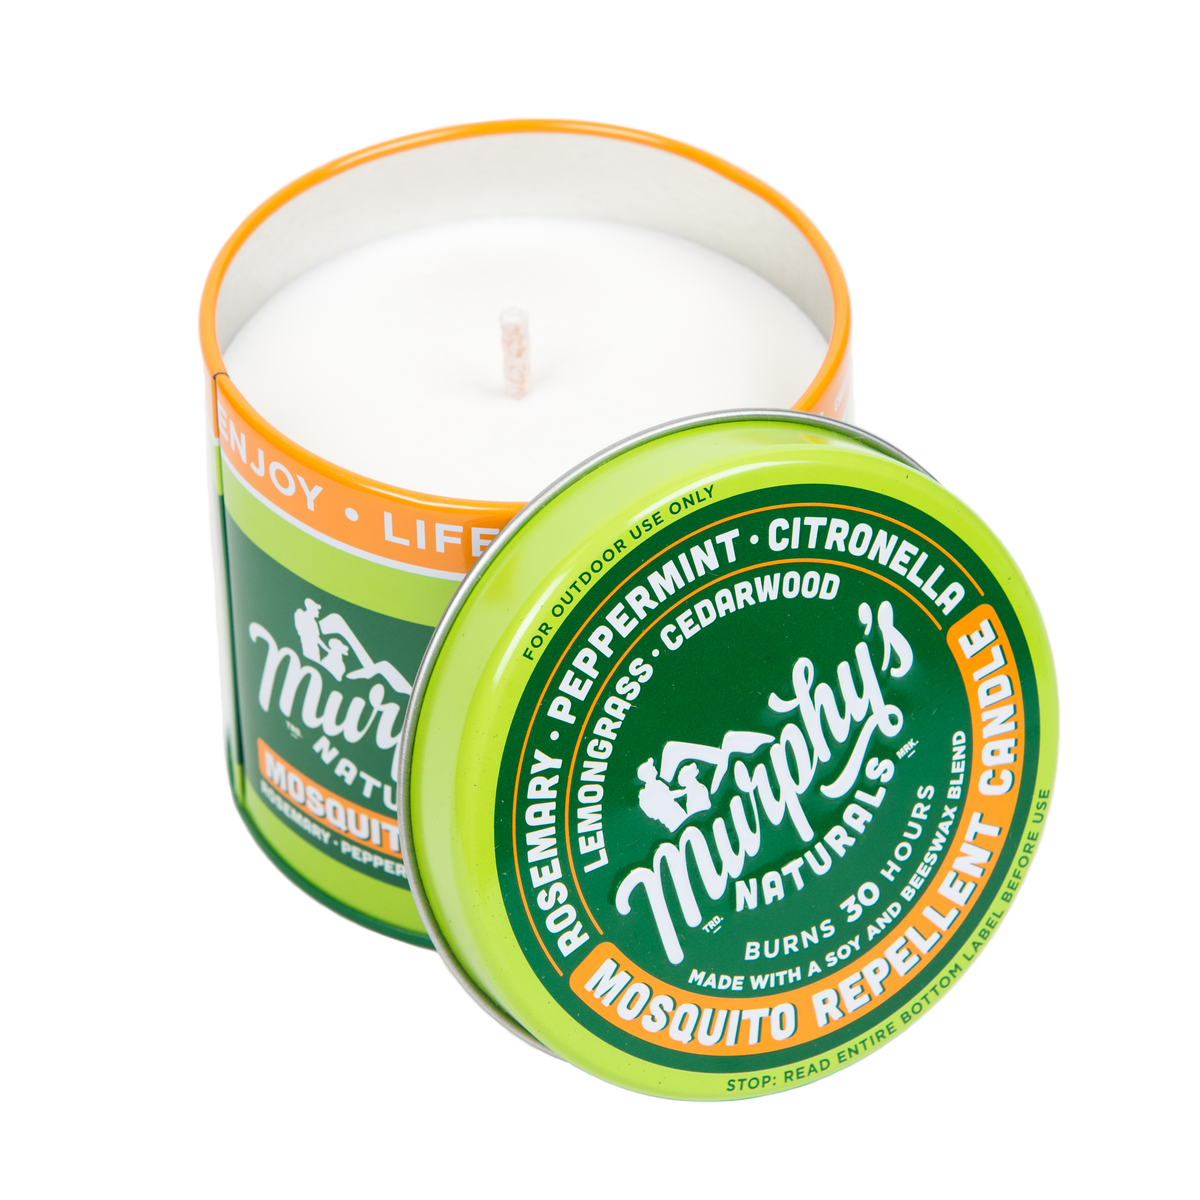 Mosquito Repellent Candle